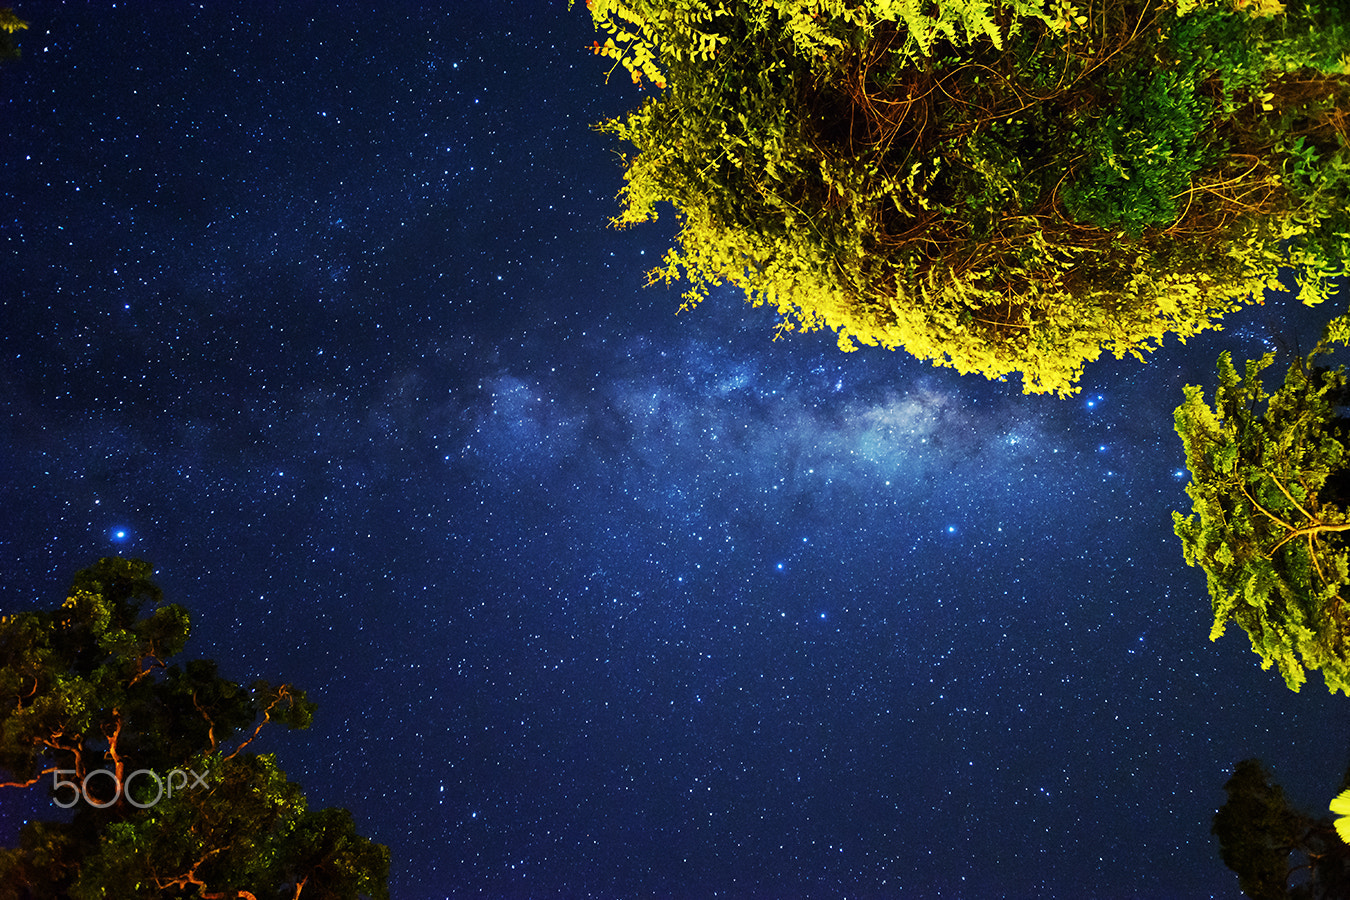 Sony a99 II sample photo. The night sky of the rainforest photography